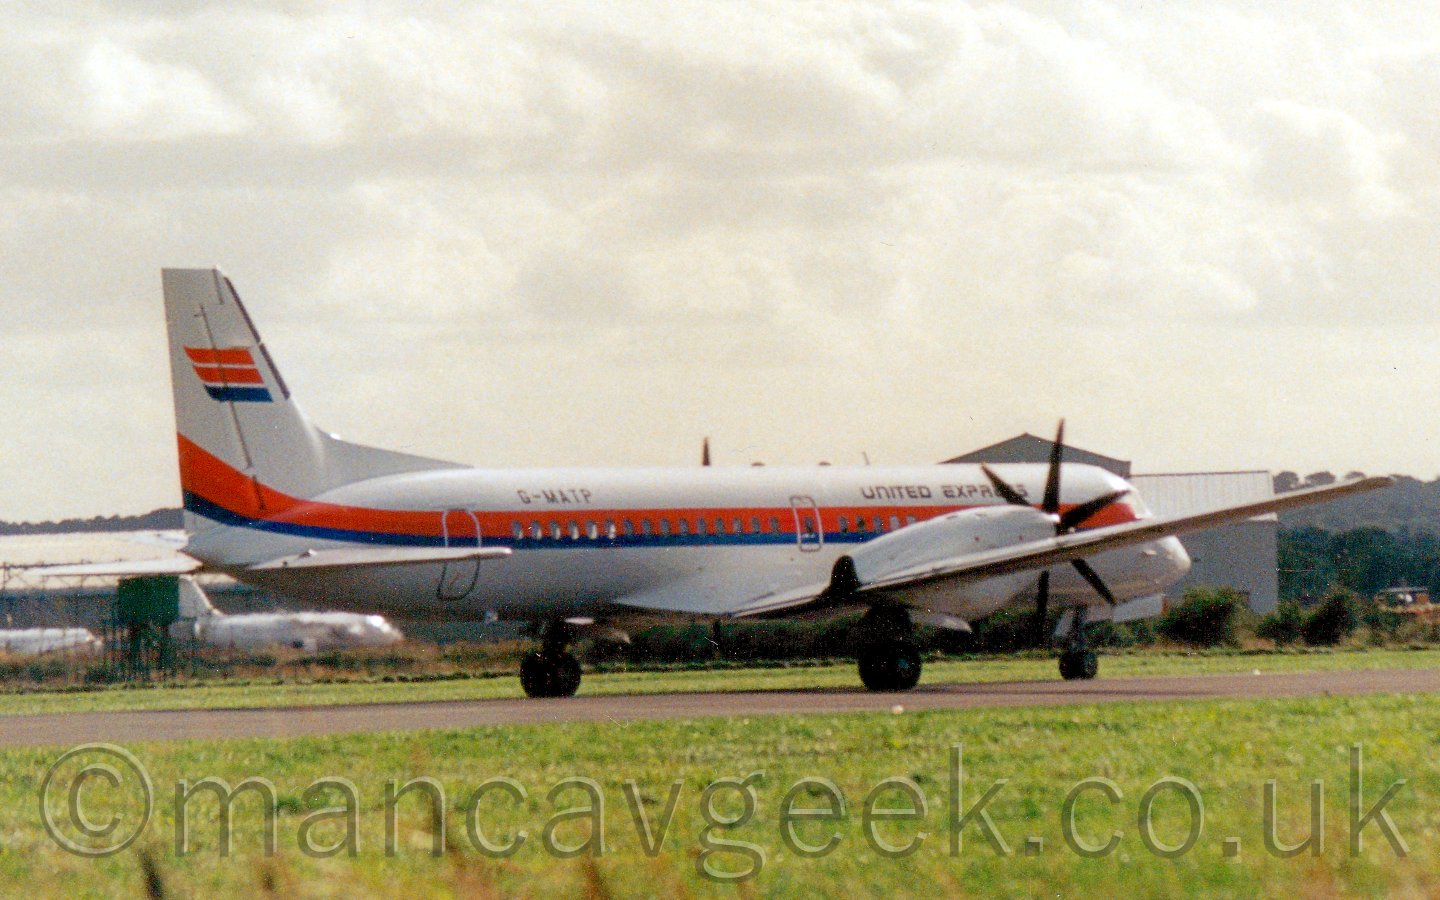 Side view of a twin propellor-engined airliner taxiing from left to right and slightly away from the camera. The plane is mostly white, with a red, orange, and blue stripe running along the body, covering the passenger cabin windows. There are black "United Express" titles on the upper forward fuselage, with the registration "G-MATP" on the upper rear fuselage. The tail has 3 red, oroange, and blue horizontal bands. In the background,a low, grey hangar stretches across the frame, with a couple of white planes parked in front of it on the middle left, under a bright but hazy sky.